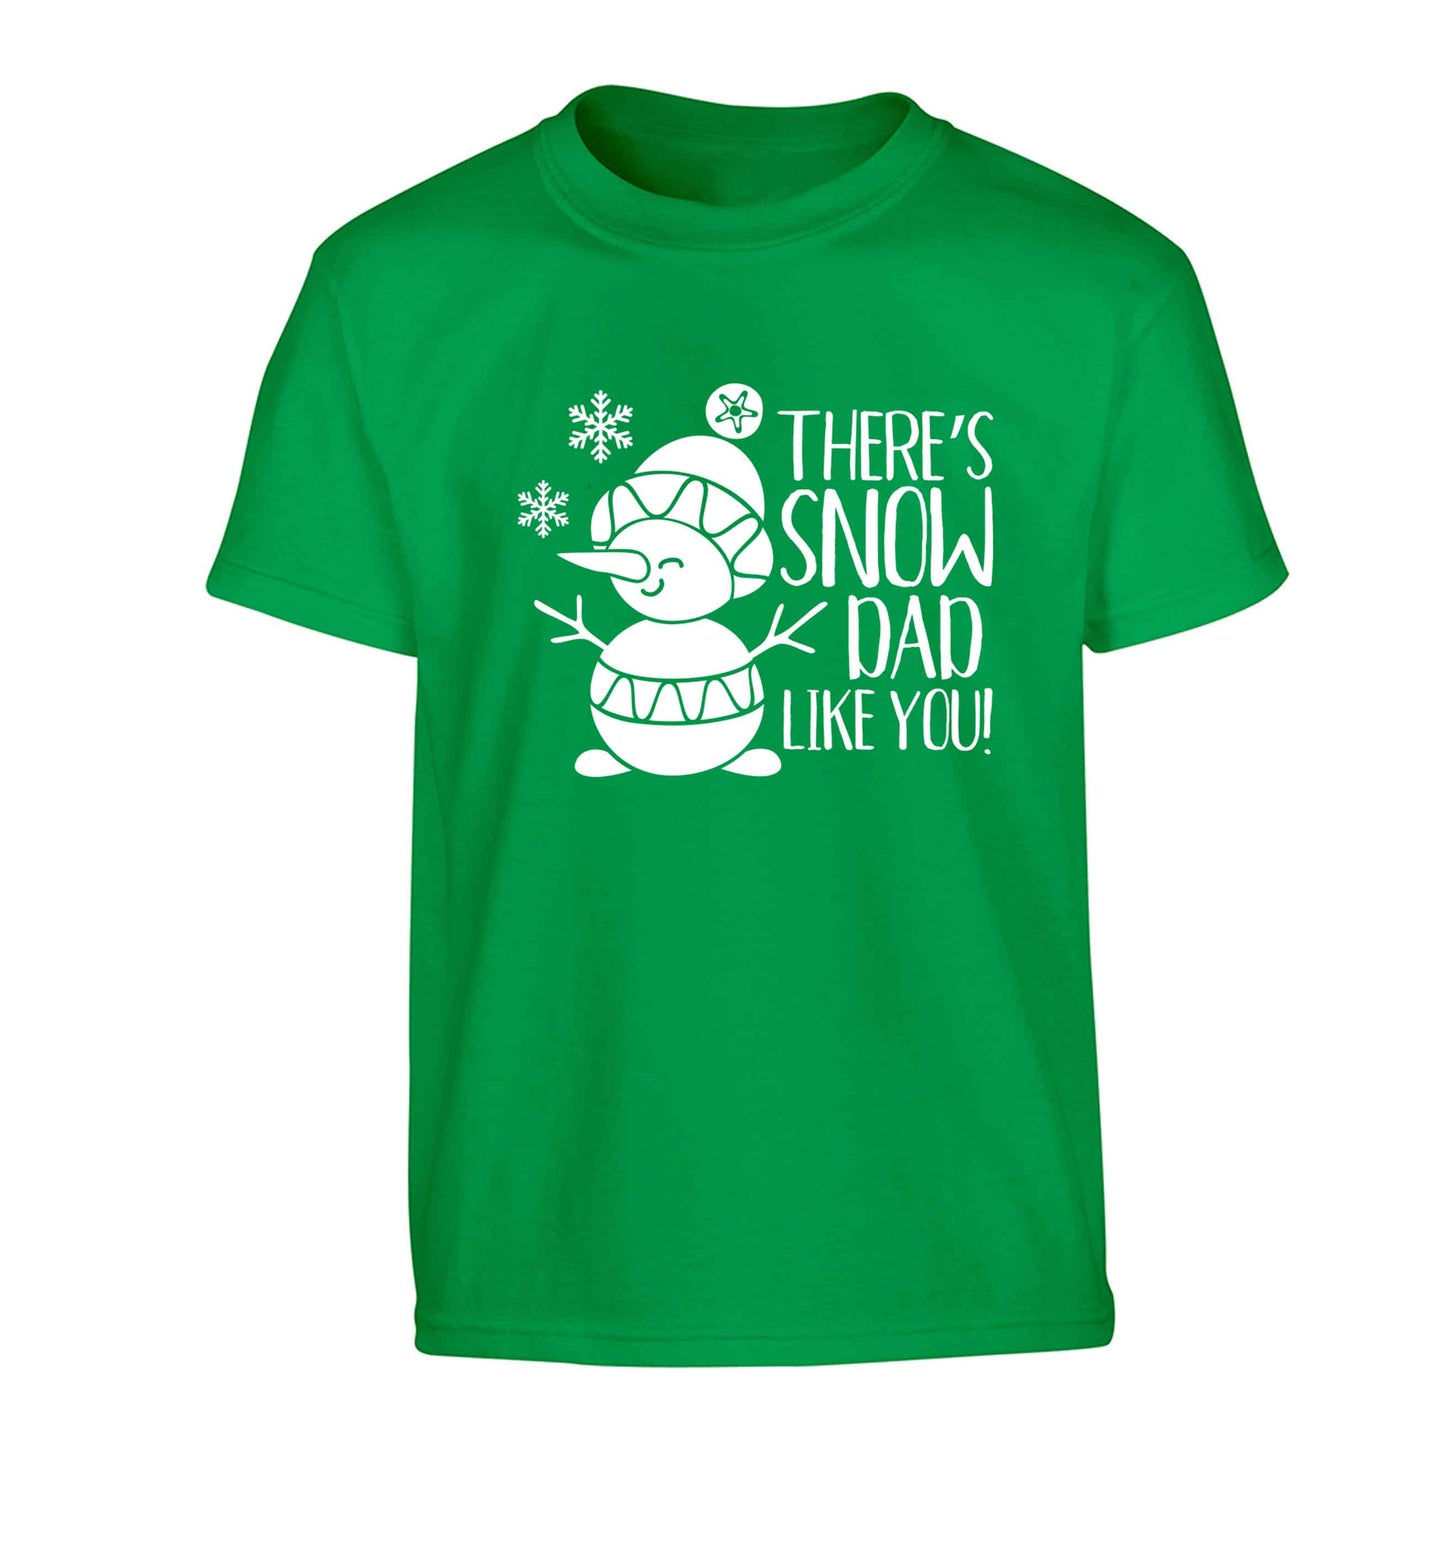 There's snow dad like you Children's green Tshirt 12-13 Years